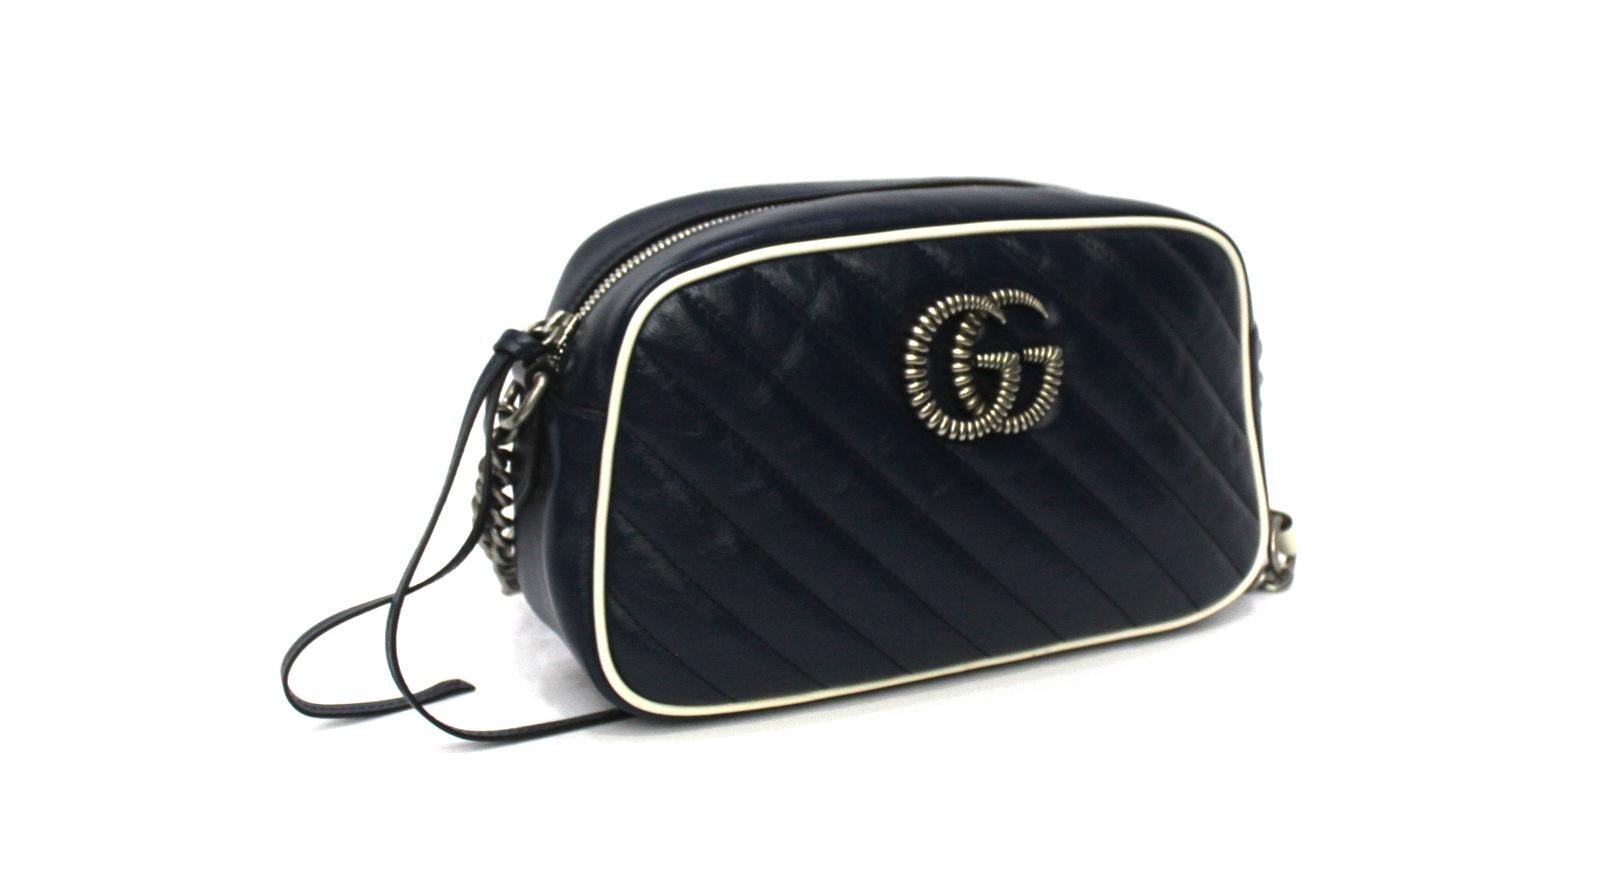 Gucci Marmont line bag in blue leather with silver hardware.
Equipped with adjustable leather shoulder strap and chain.
Zip closure, internally very large.
The bag is in excellent condition, equipped with its original dustbag.
Don't miss it.